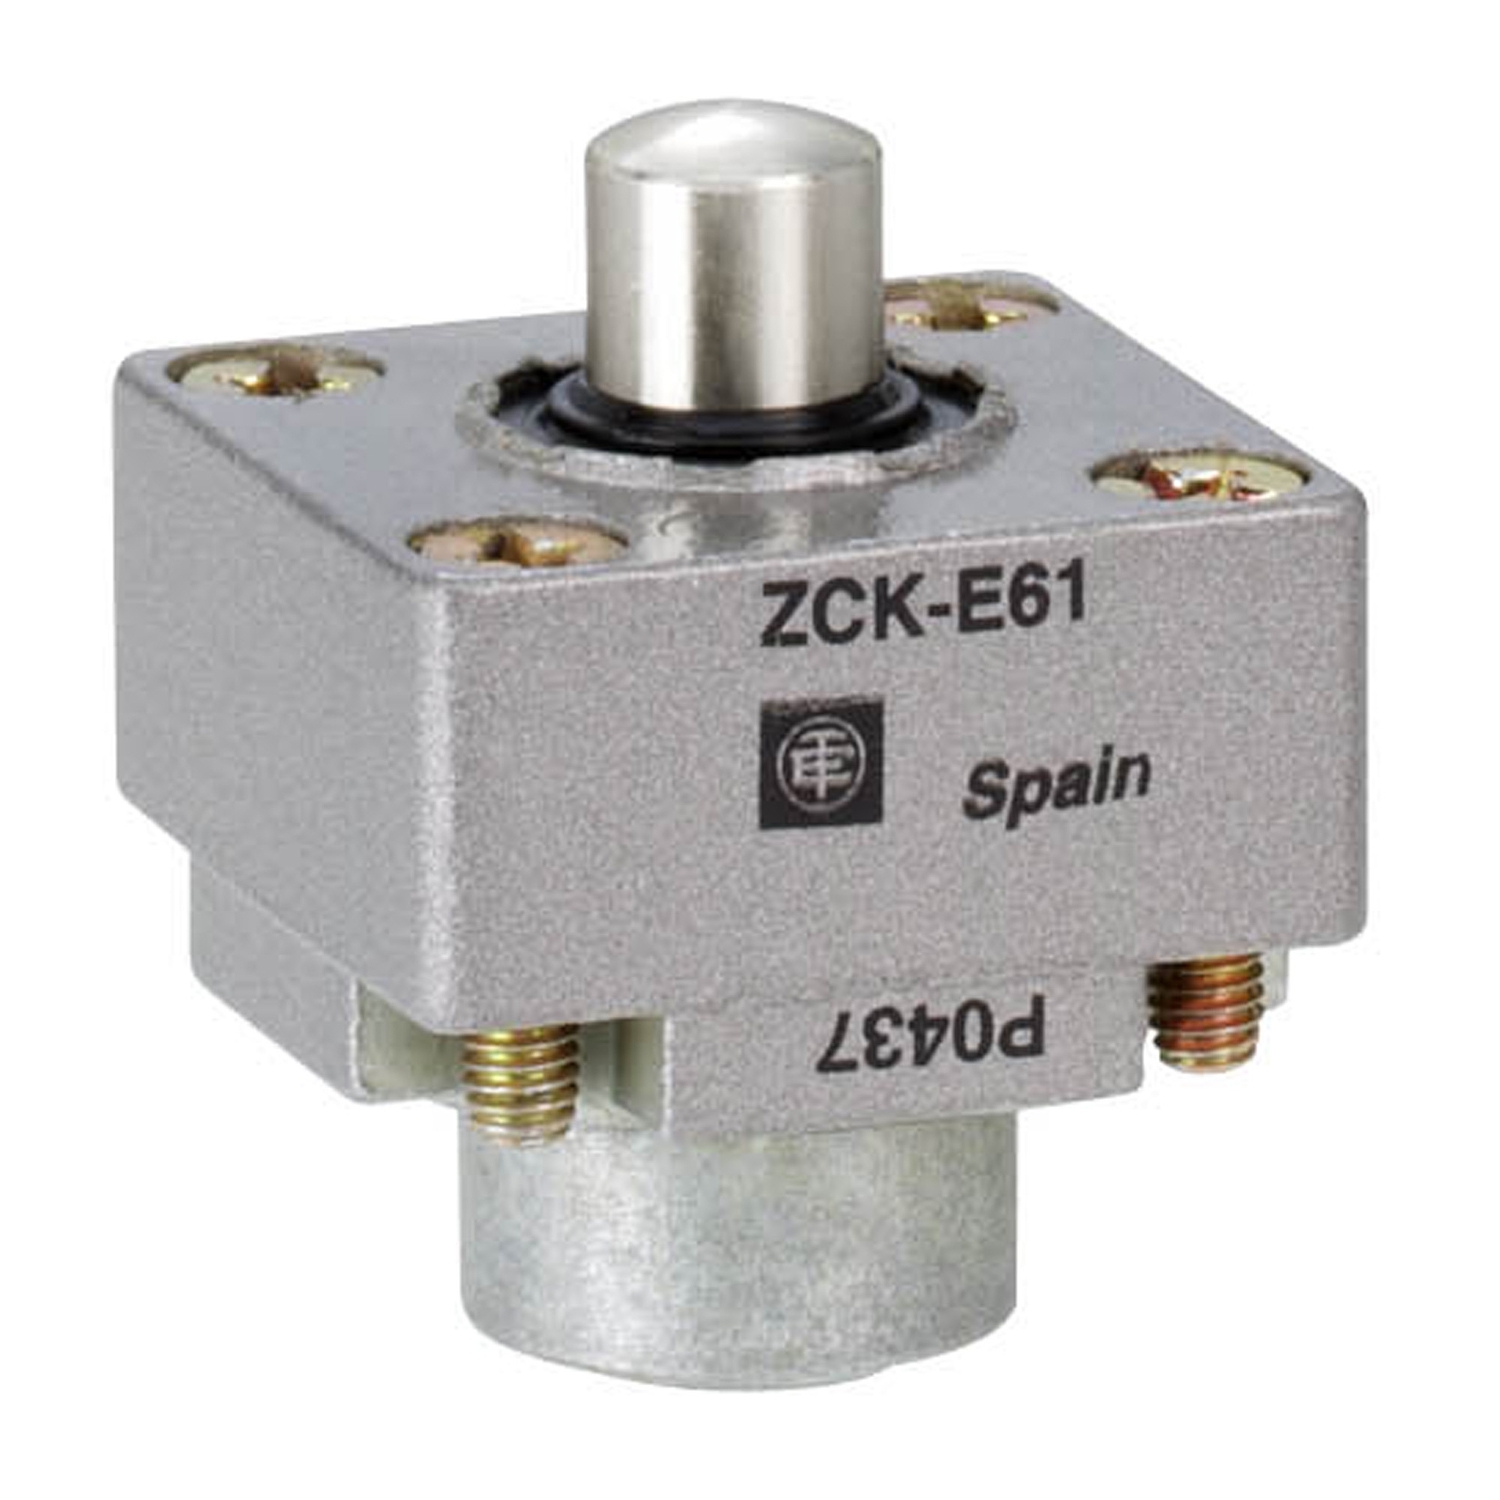 Limit switch head, Limit switches XC Standard, ZCKE, side metal plunger